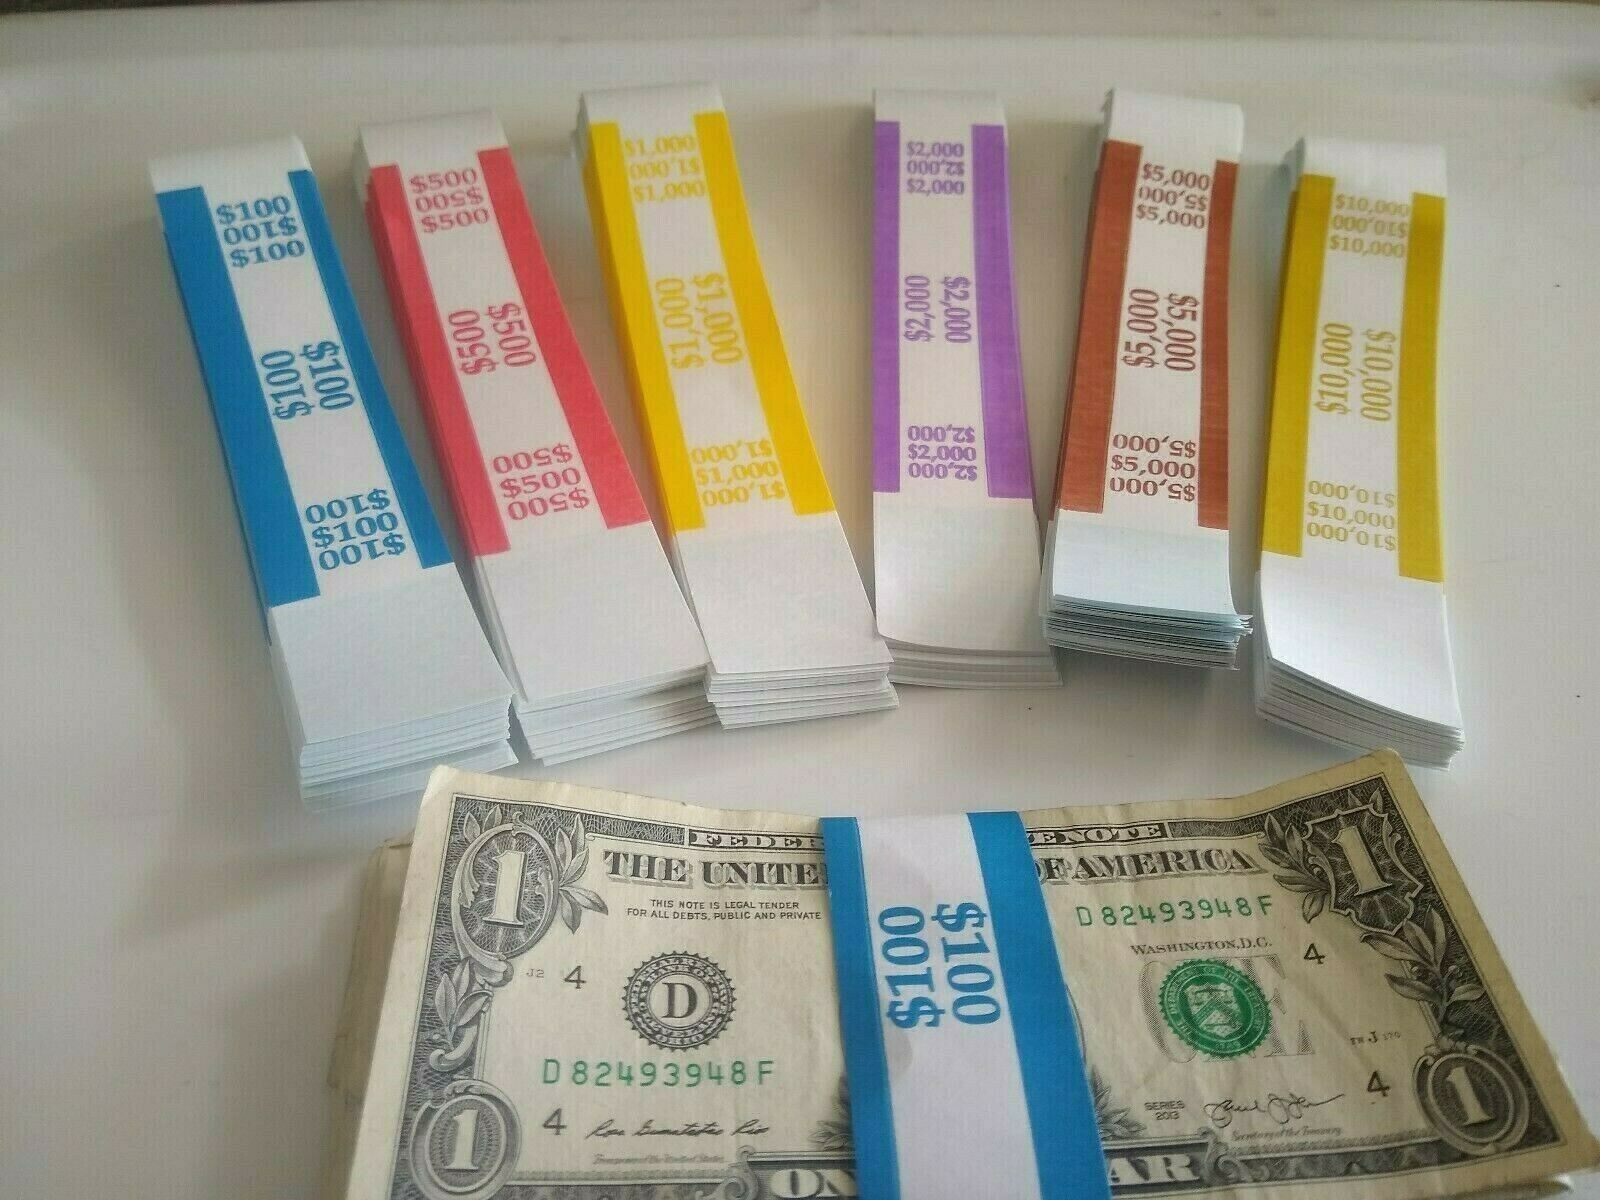 90 Self -sealing Currency Straps/bands $100 $500 $1000 $2000 $5000 $10000